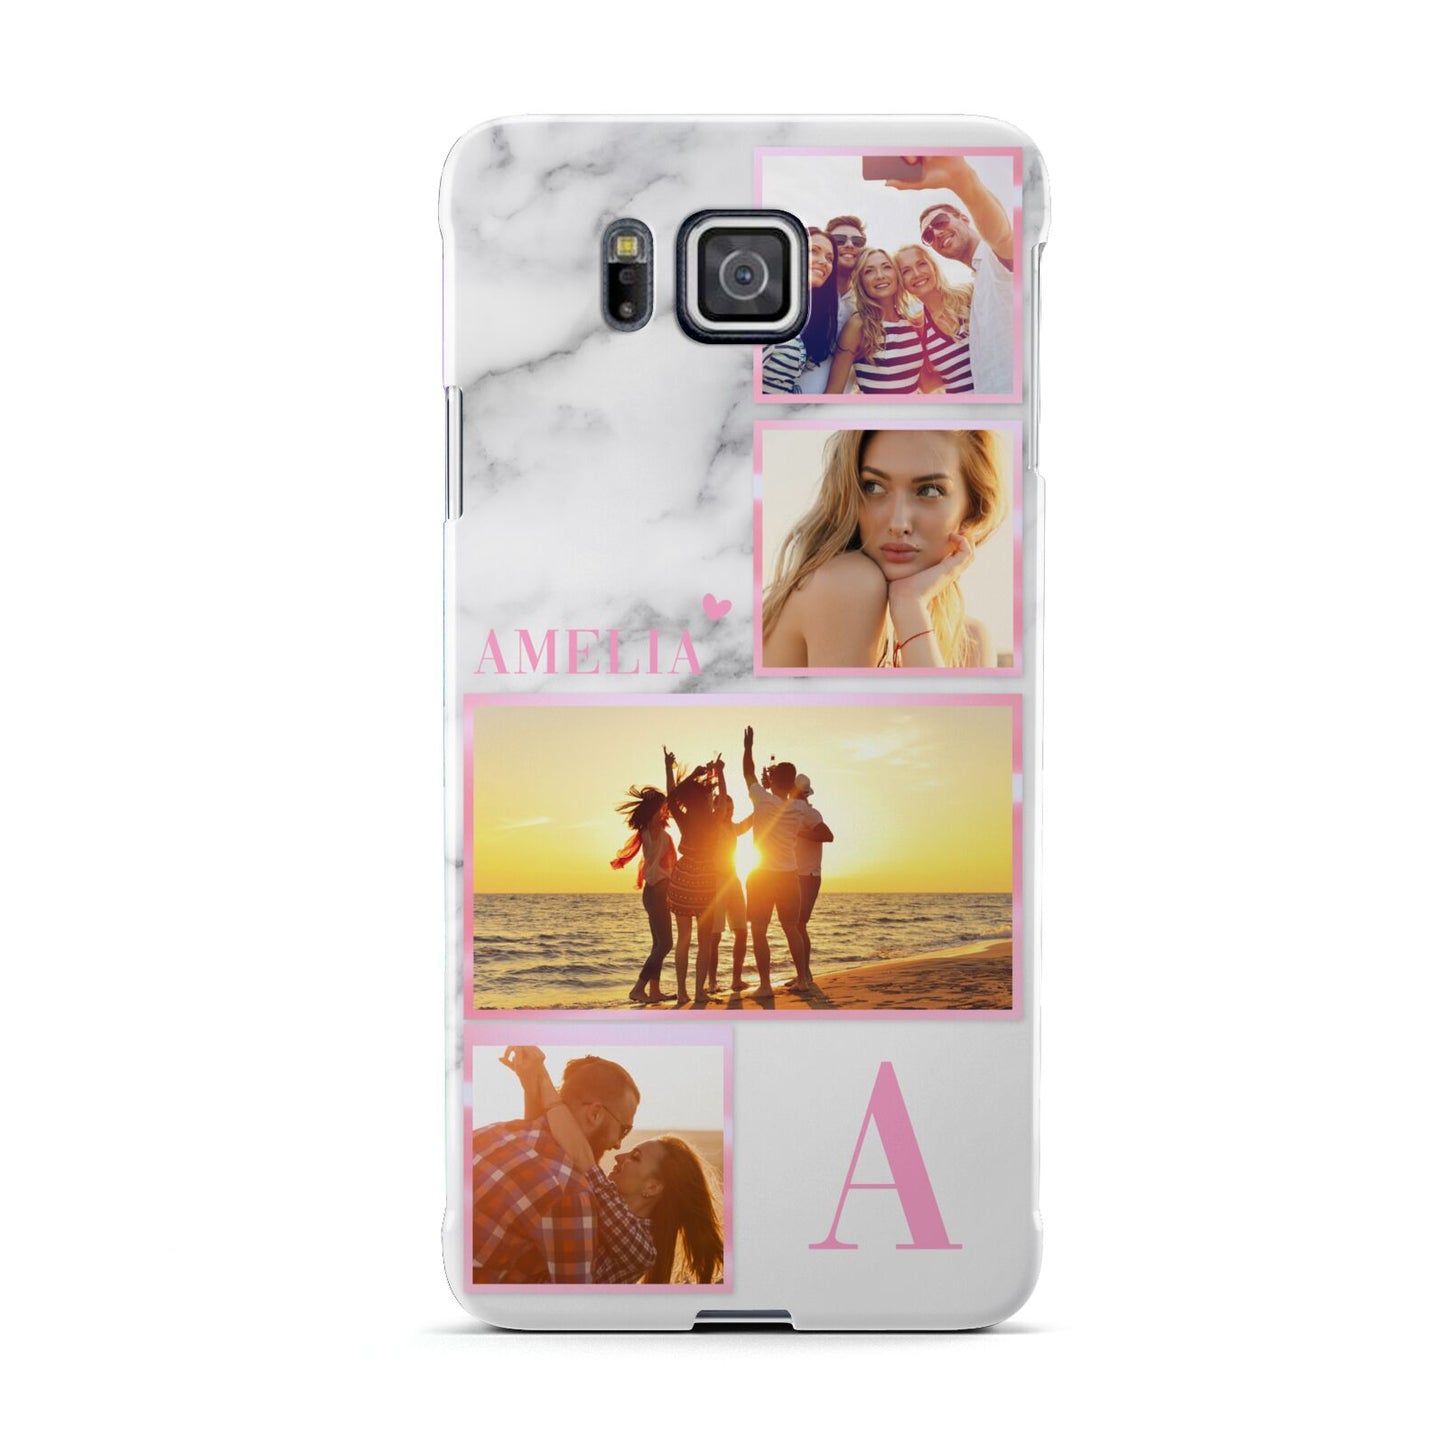 Personalised Marble Photo Collage Samsung Galaxy Alpha Case